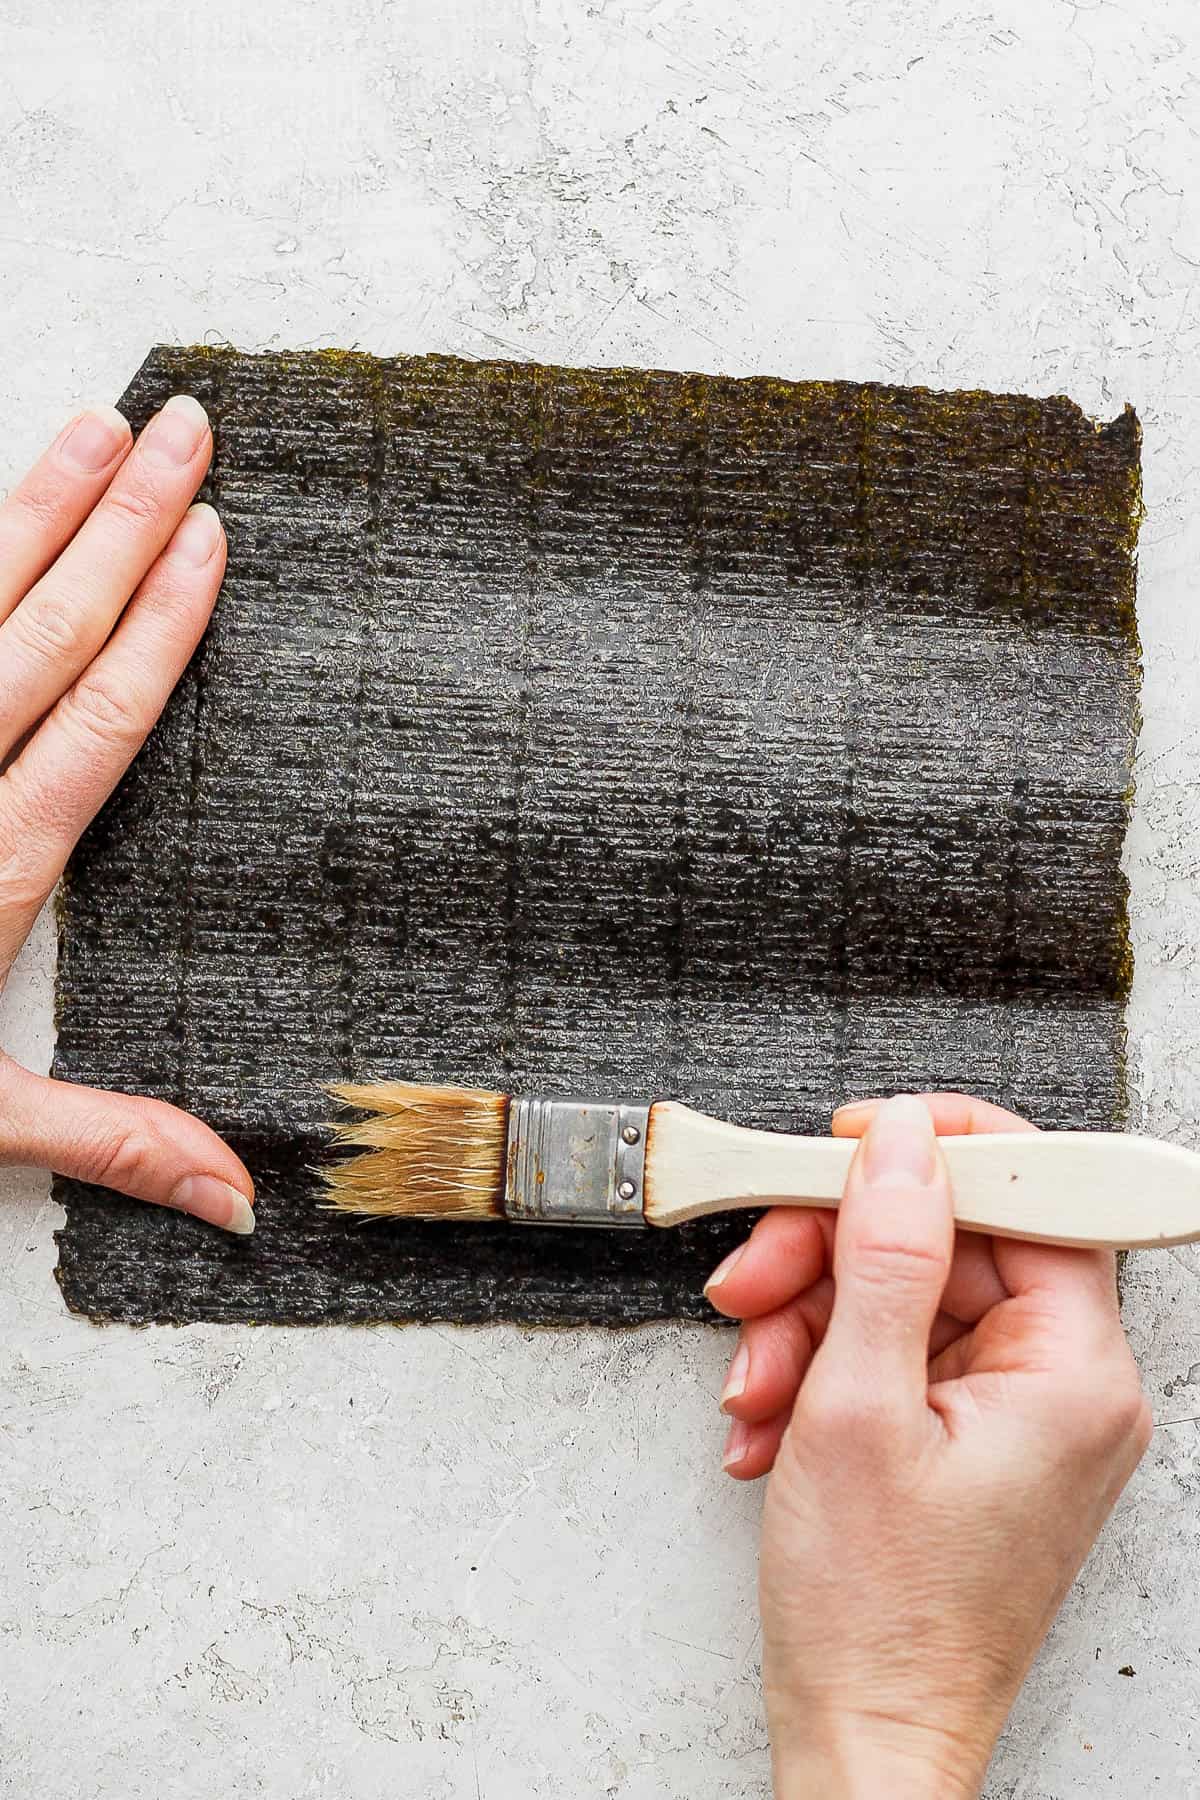 Water being brushed on the bottom inch of a nori sheet.